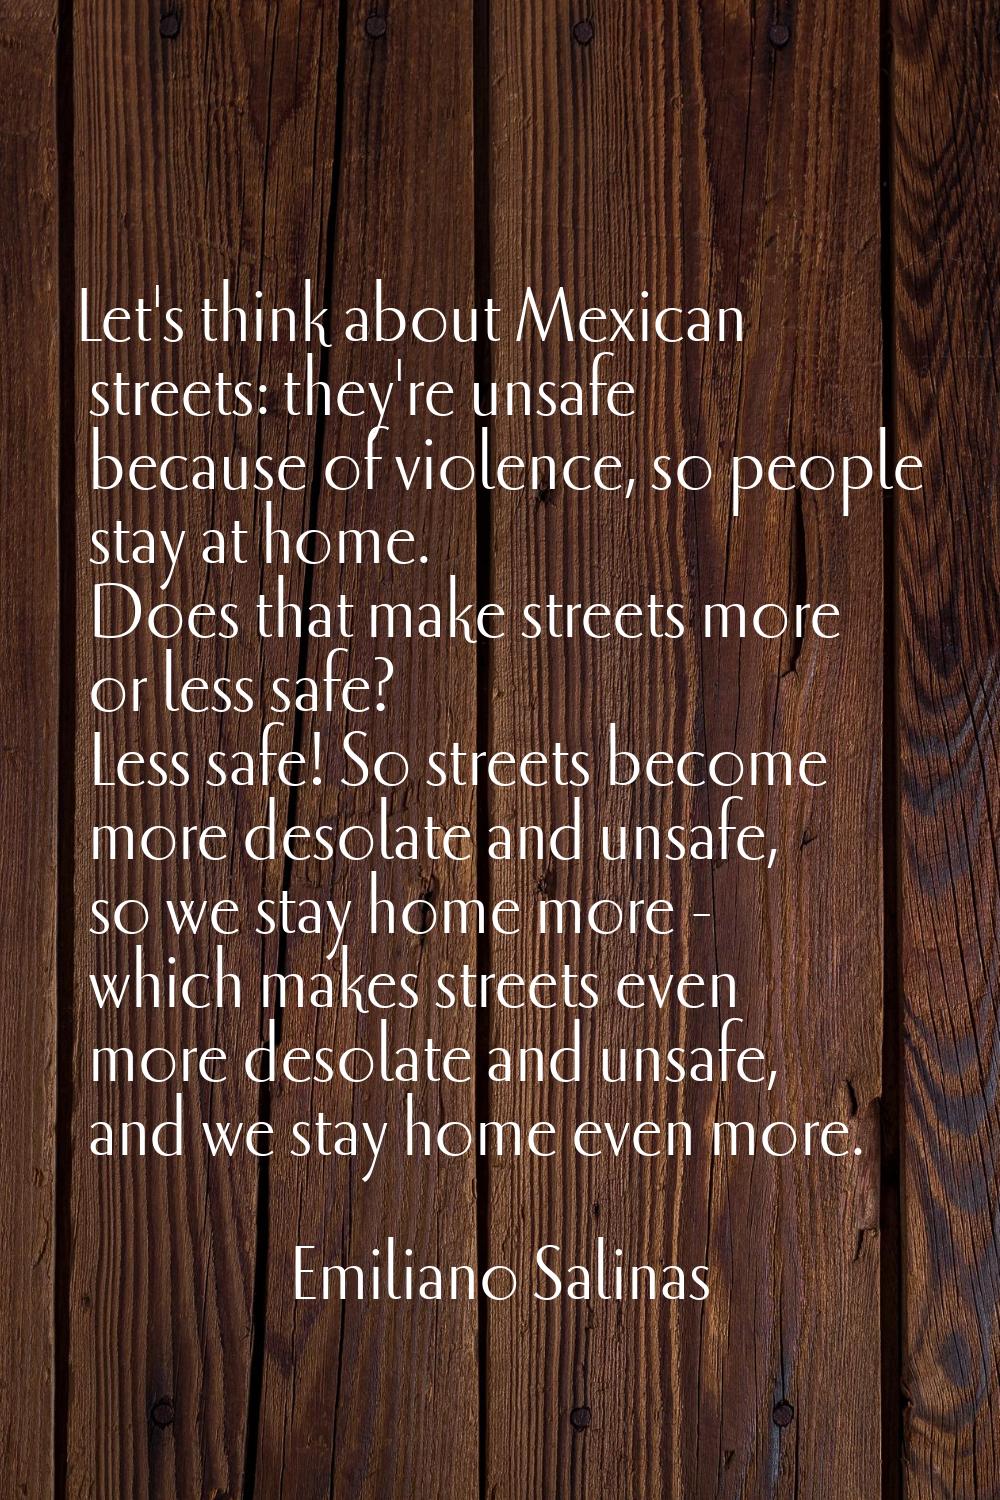 Let's think about Mexican streets: they're unsafe because of violence, so people stay at home. Does